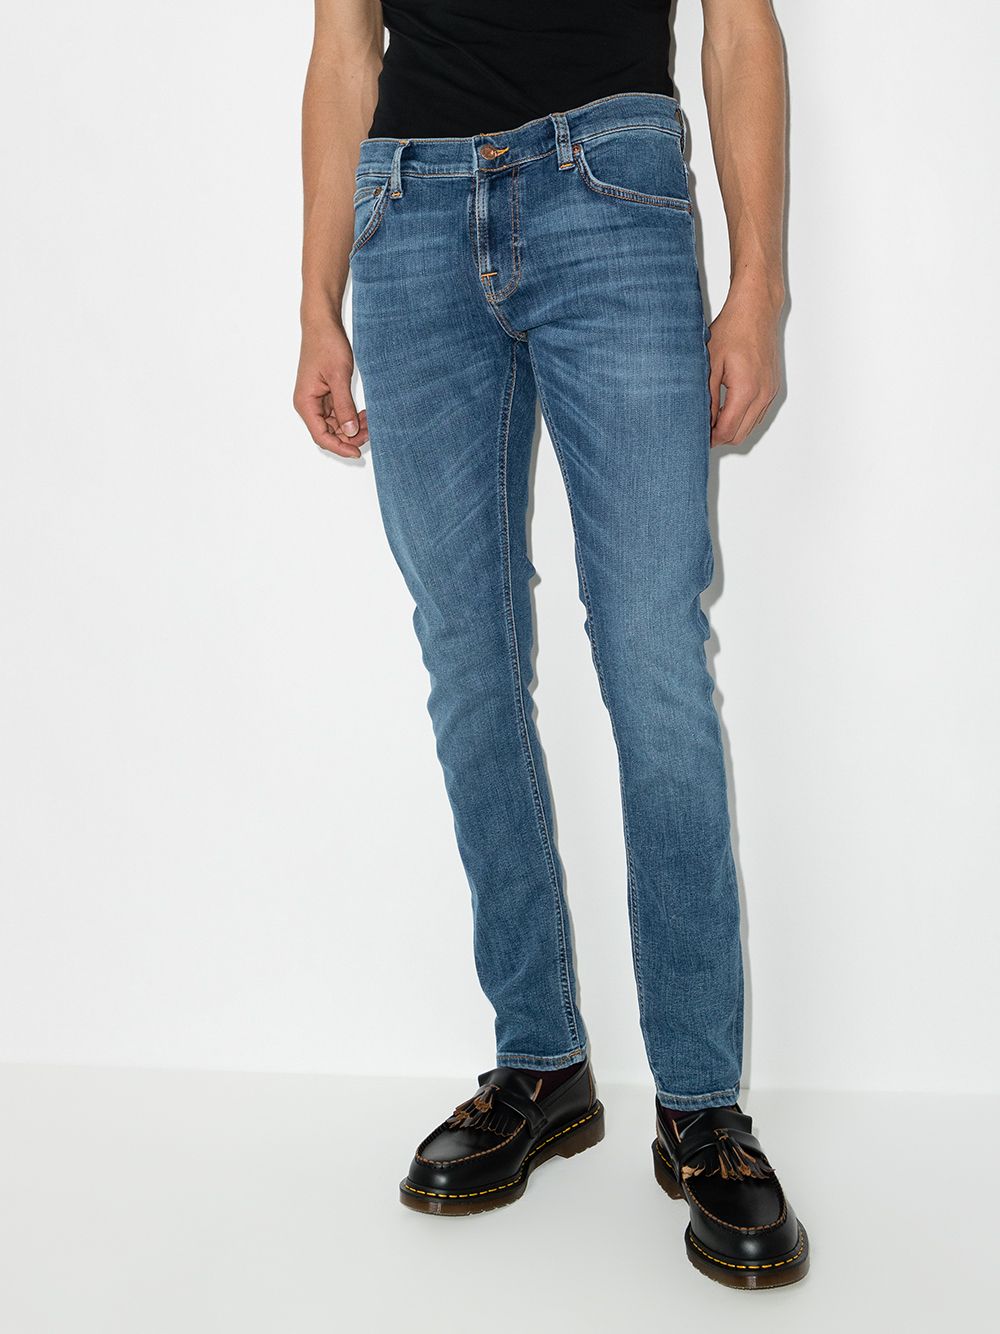 Nudie Jeans Tight Terry Skinny Jeans - Farfetch